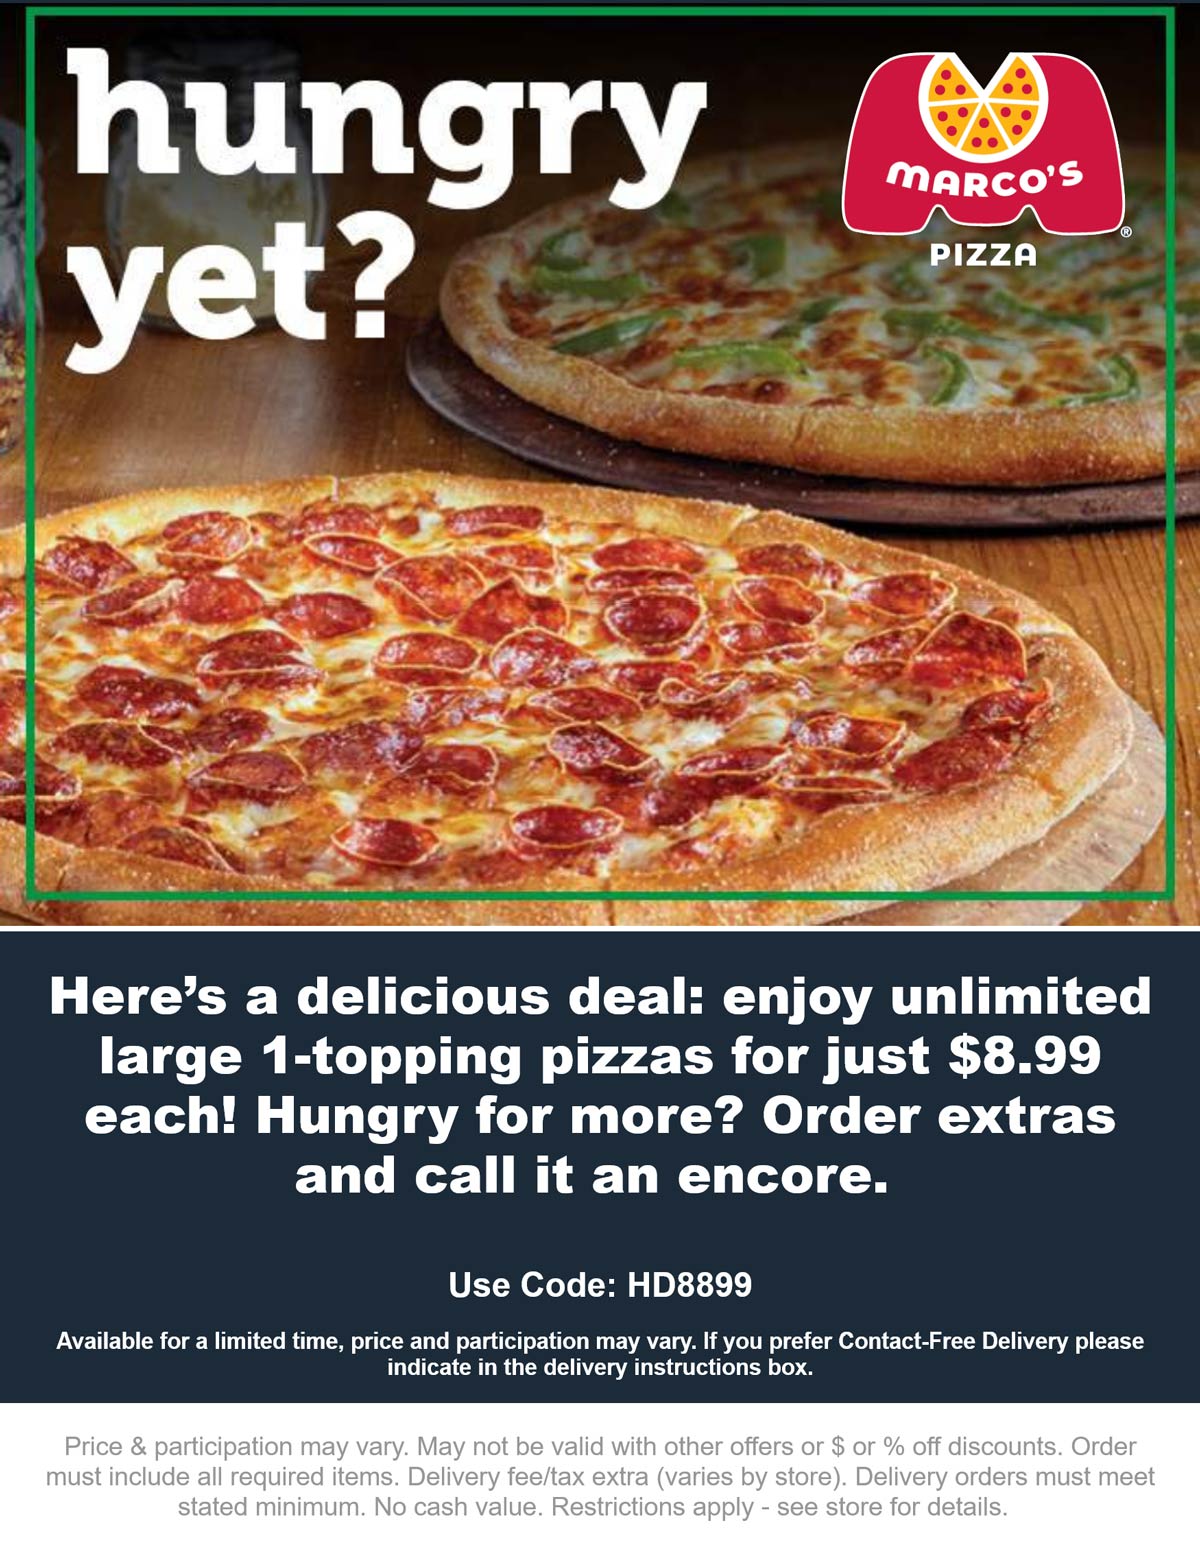 1topping large pizzas for 9 at Marcos Pizza via promo code HD8899 